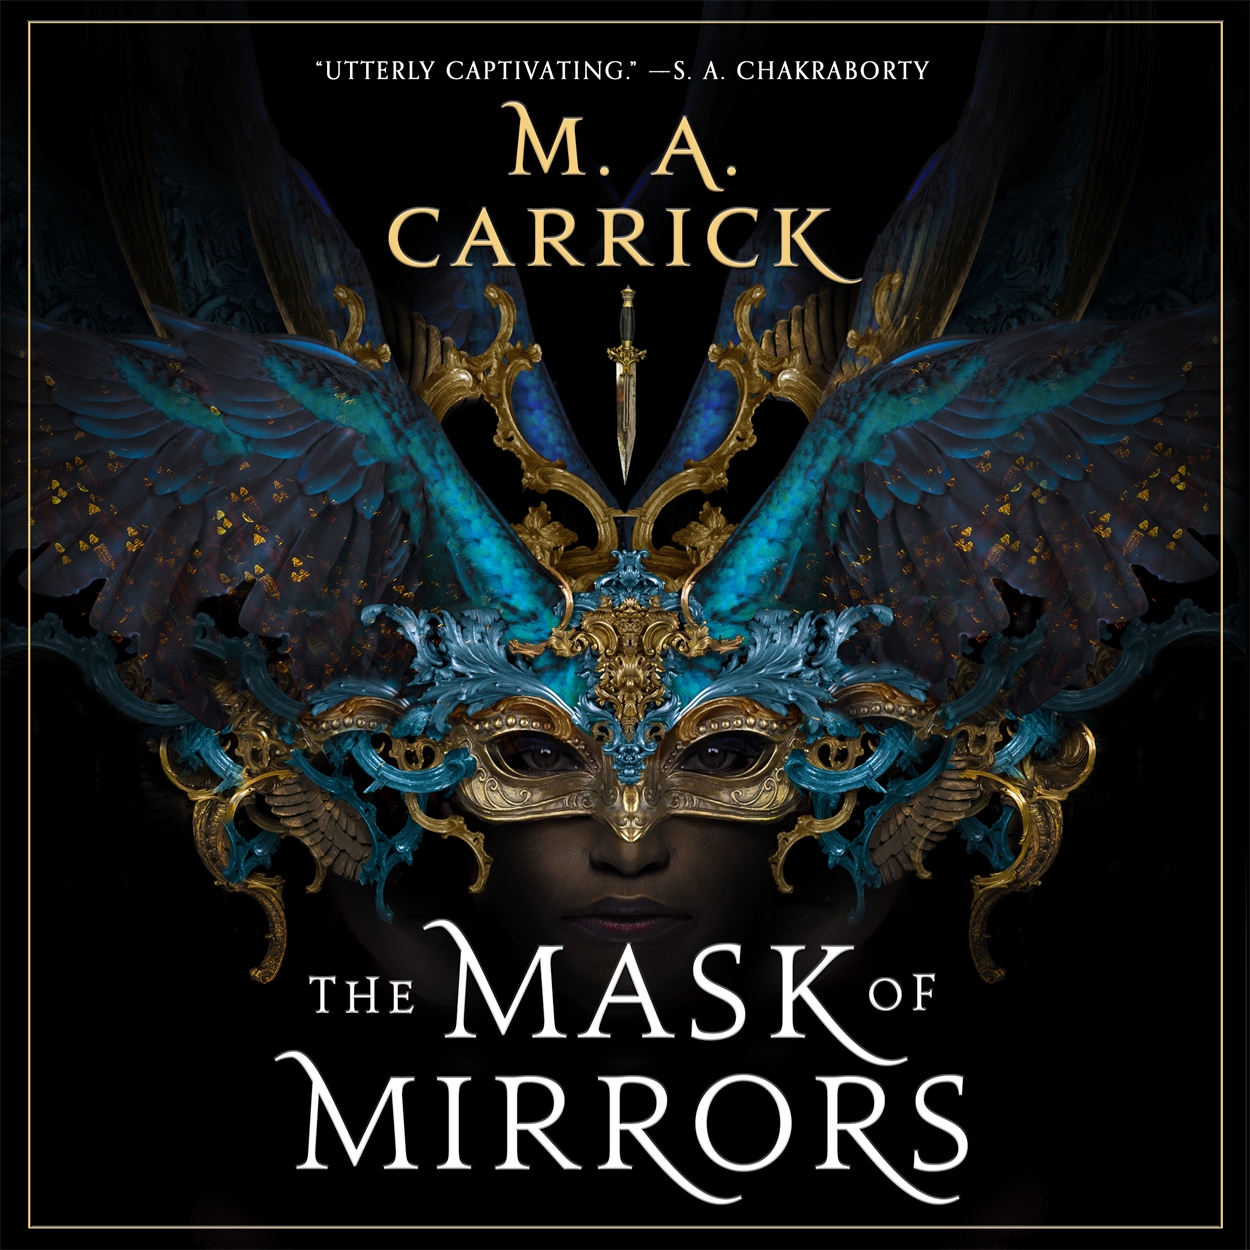 The Mask of Mirrors by M. A. Carrick | Hachette UK